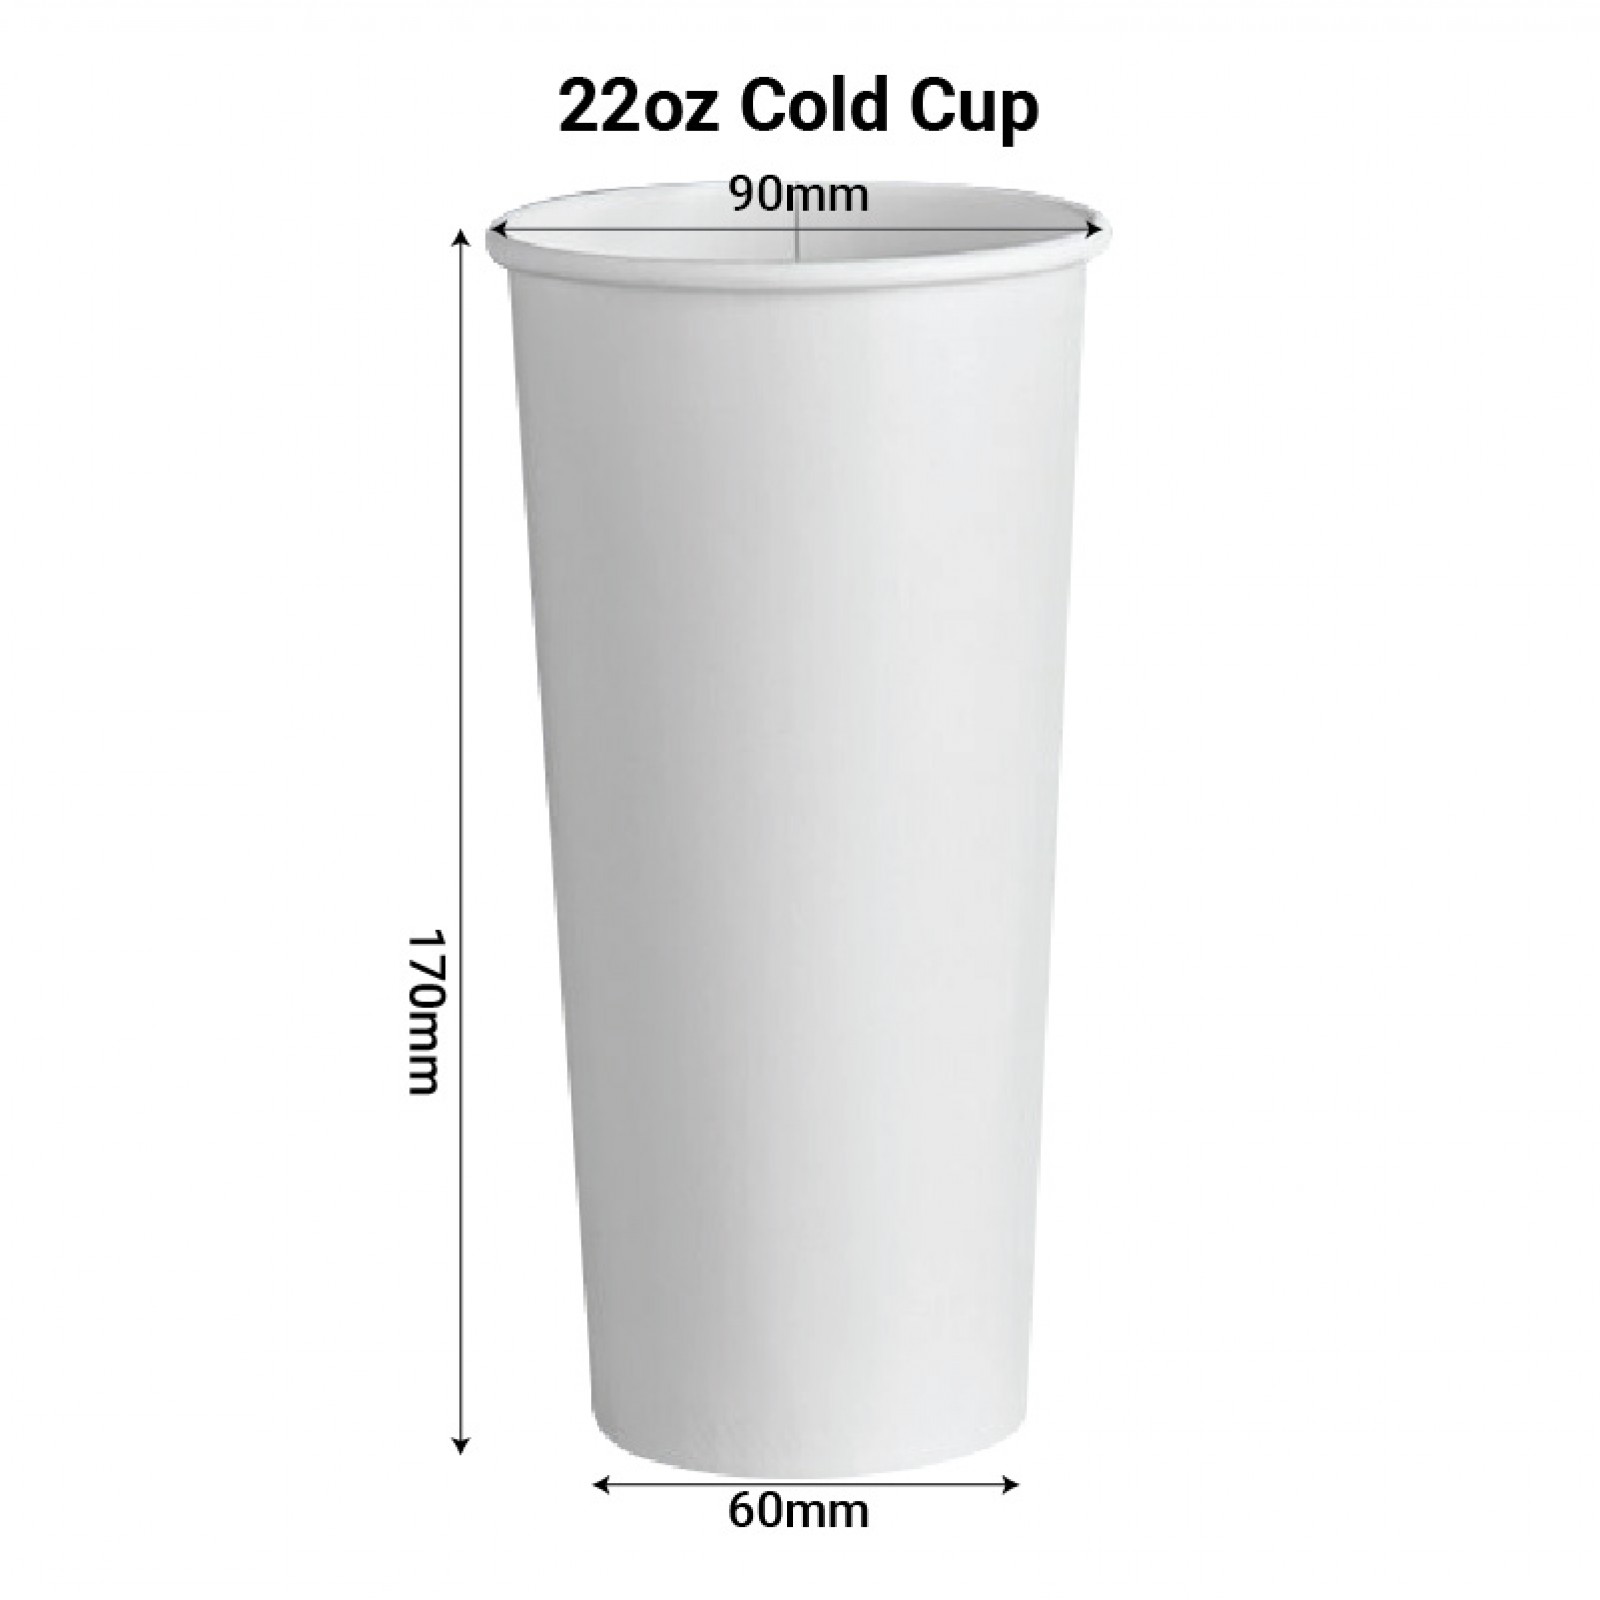 22oz Cold Cup